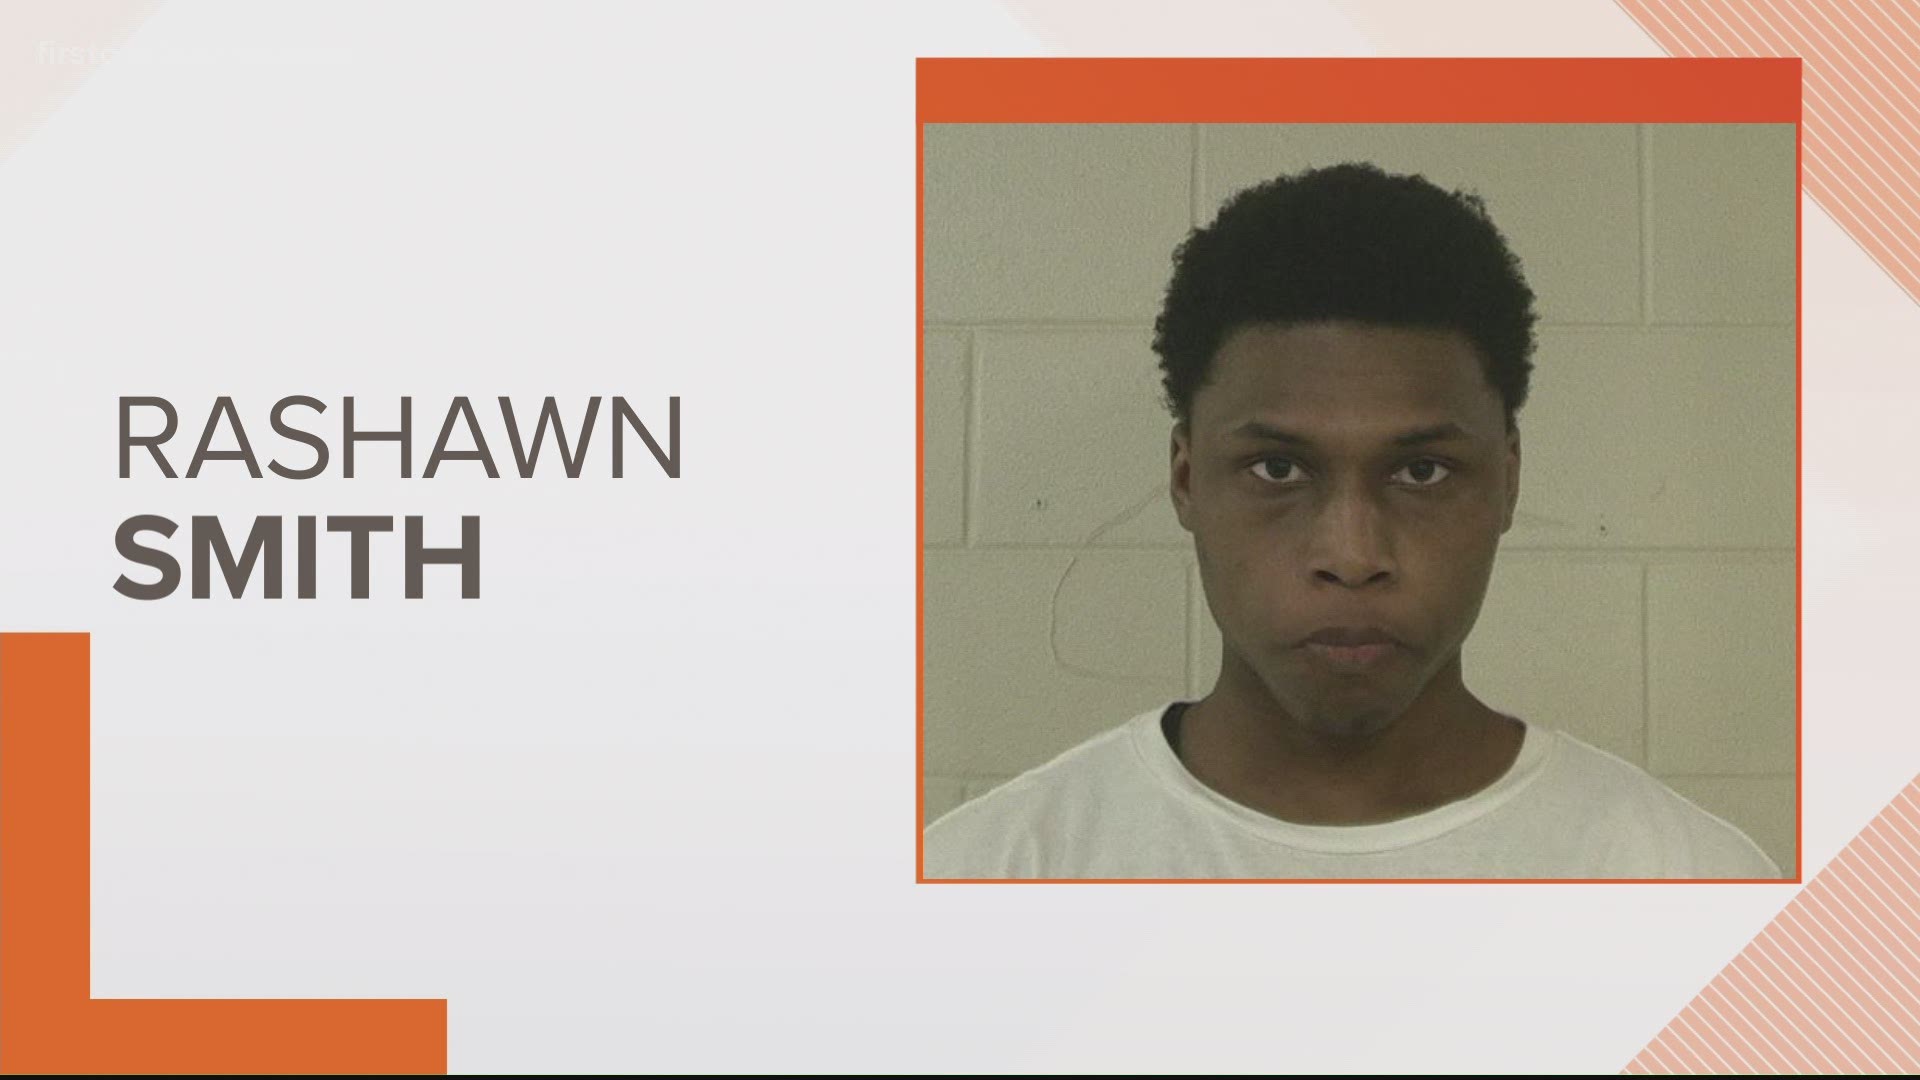 Rashawn Smith, 20, was arrested Sunday by The Georgia Bureau of Investigation and charged with dissemination of information relating to terroristic acts.